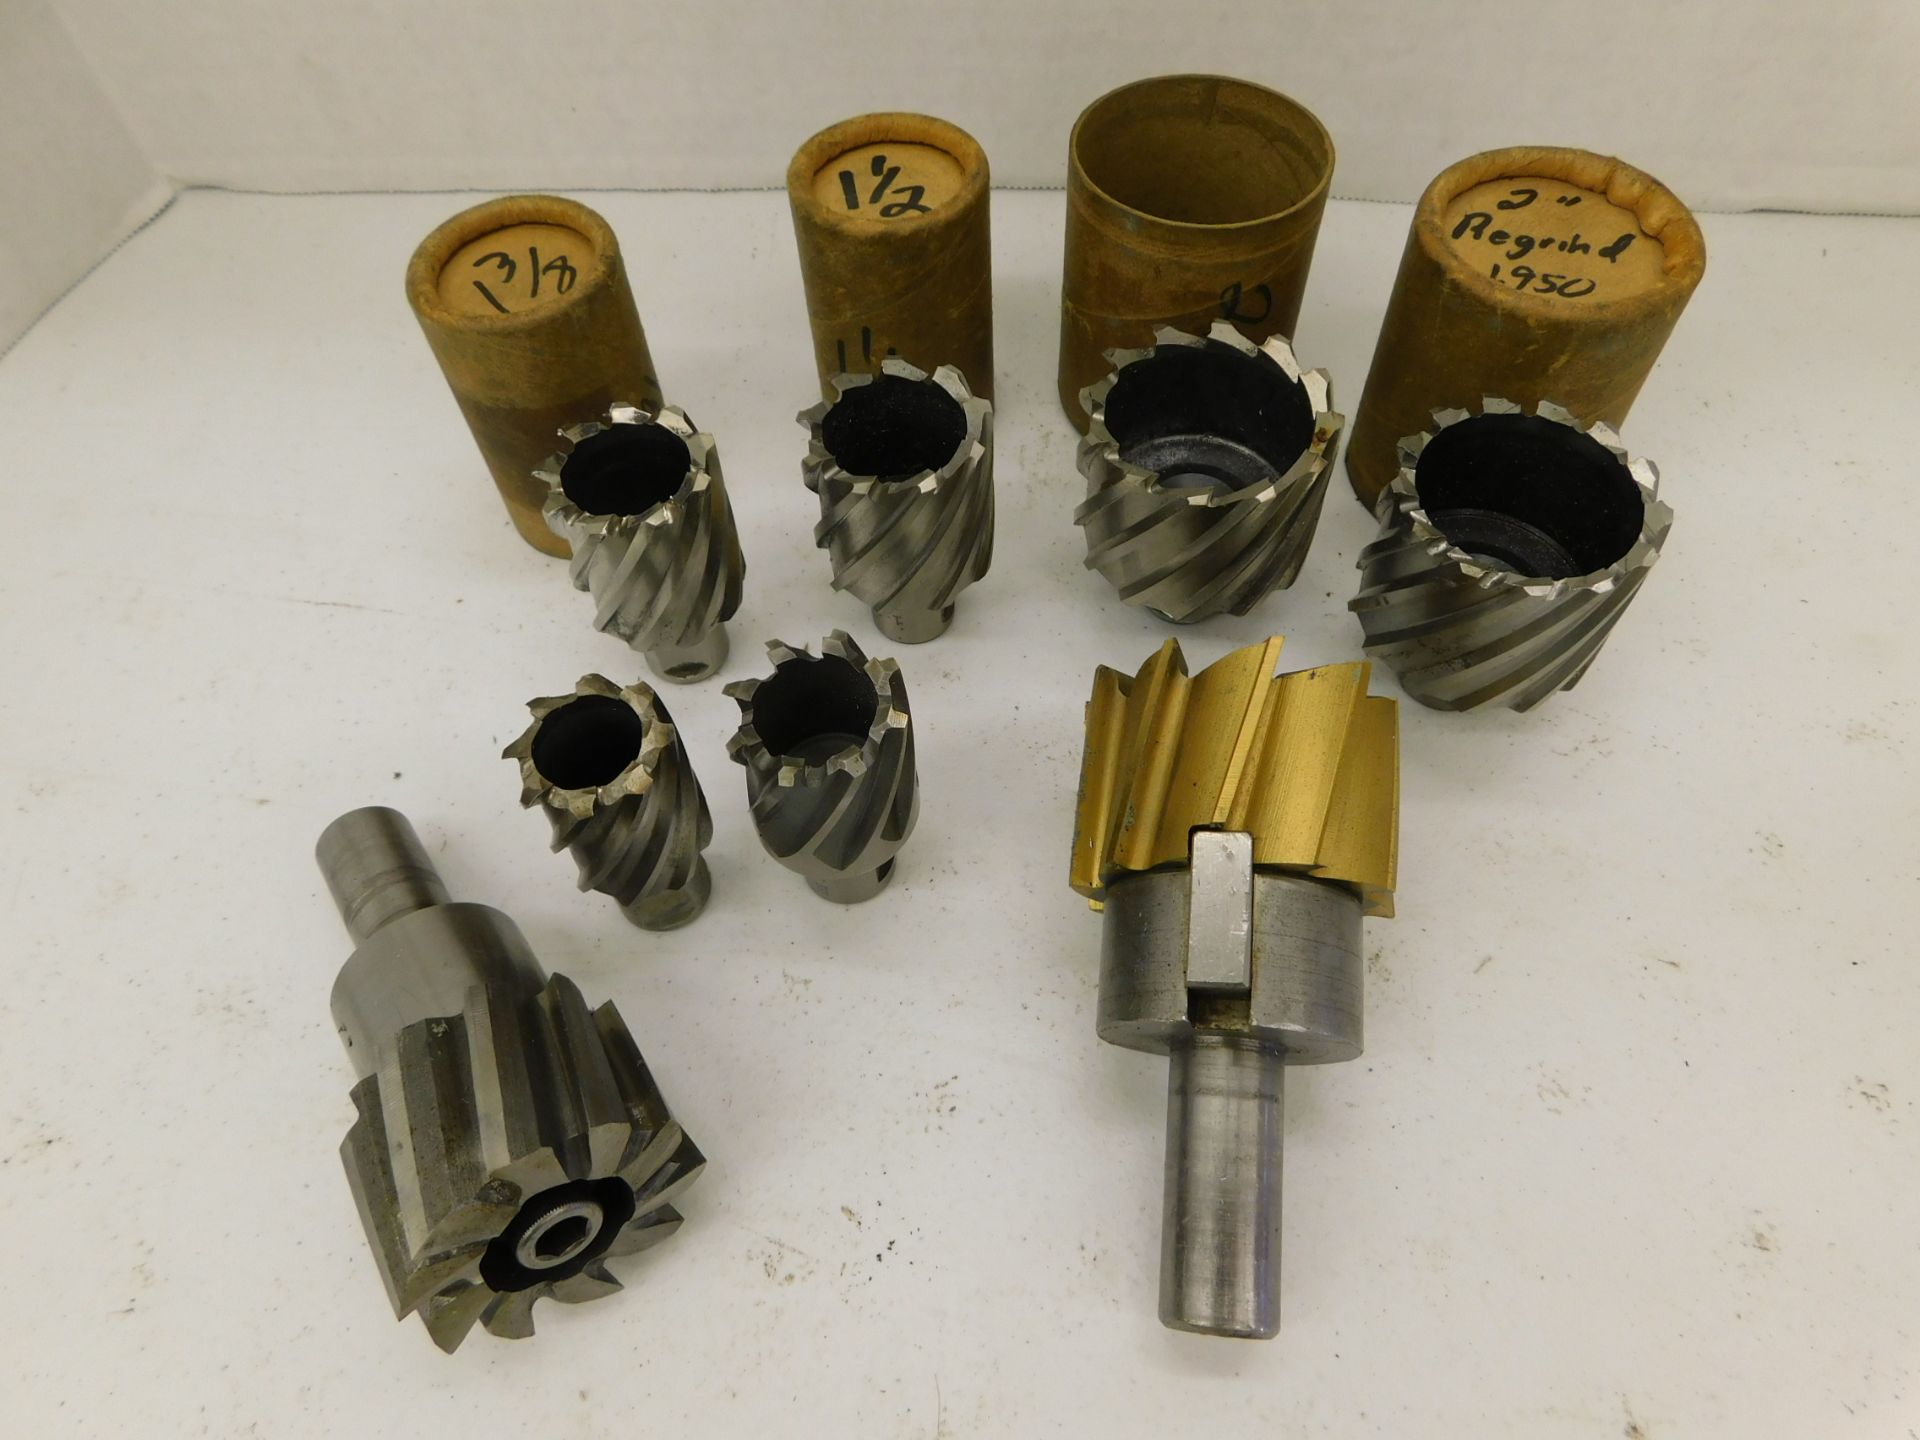 Slugger Bits and Milling Cutters